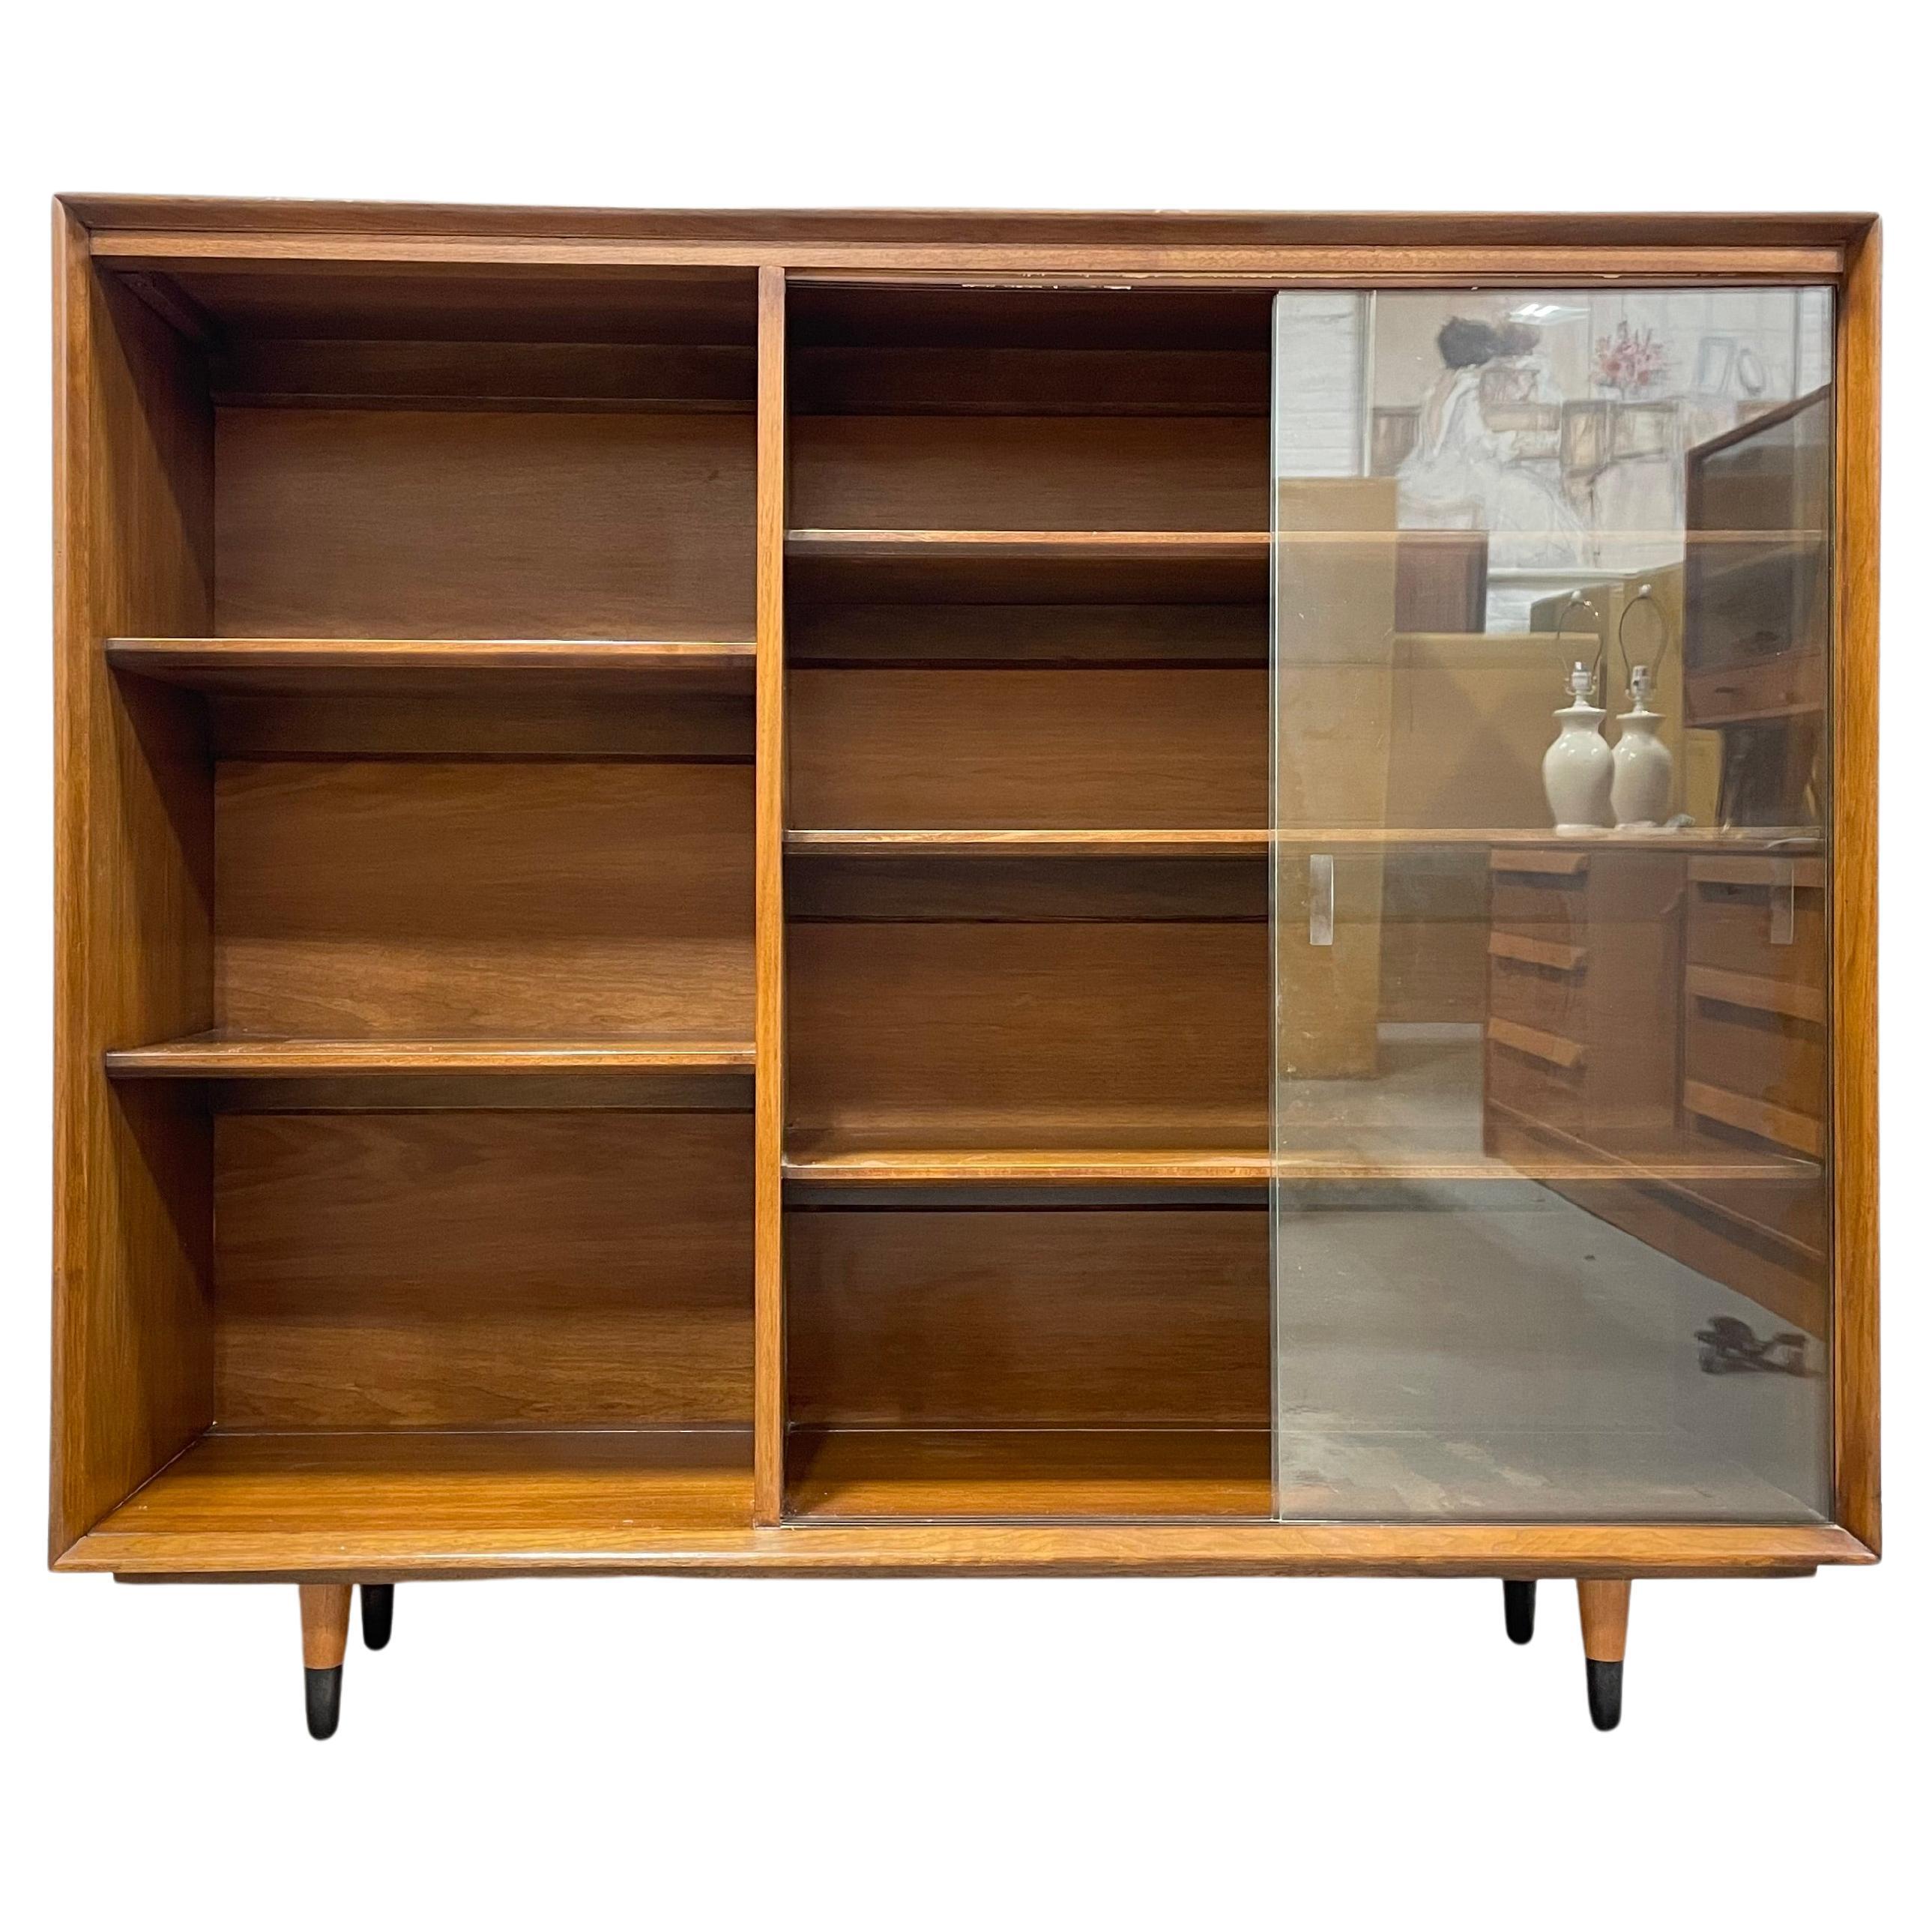 Large Mid-Century Modern Walnut Bookcase, circa 1960s. Loads of storage for all your books or showcase your collectables across a total of seven deep and wide shelves. Thoughtful layout of three shorter shelves, (the lowest is tall enough for